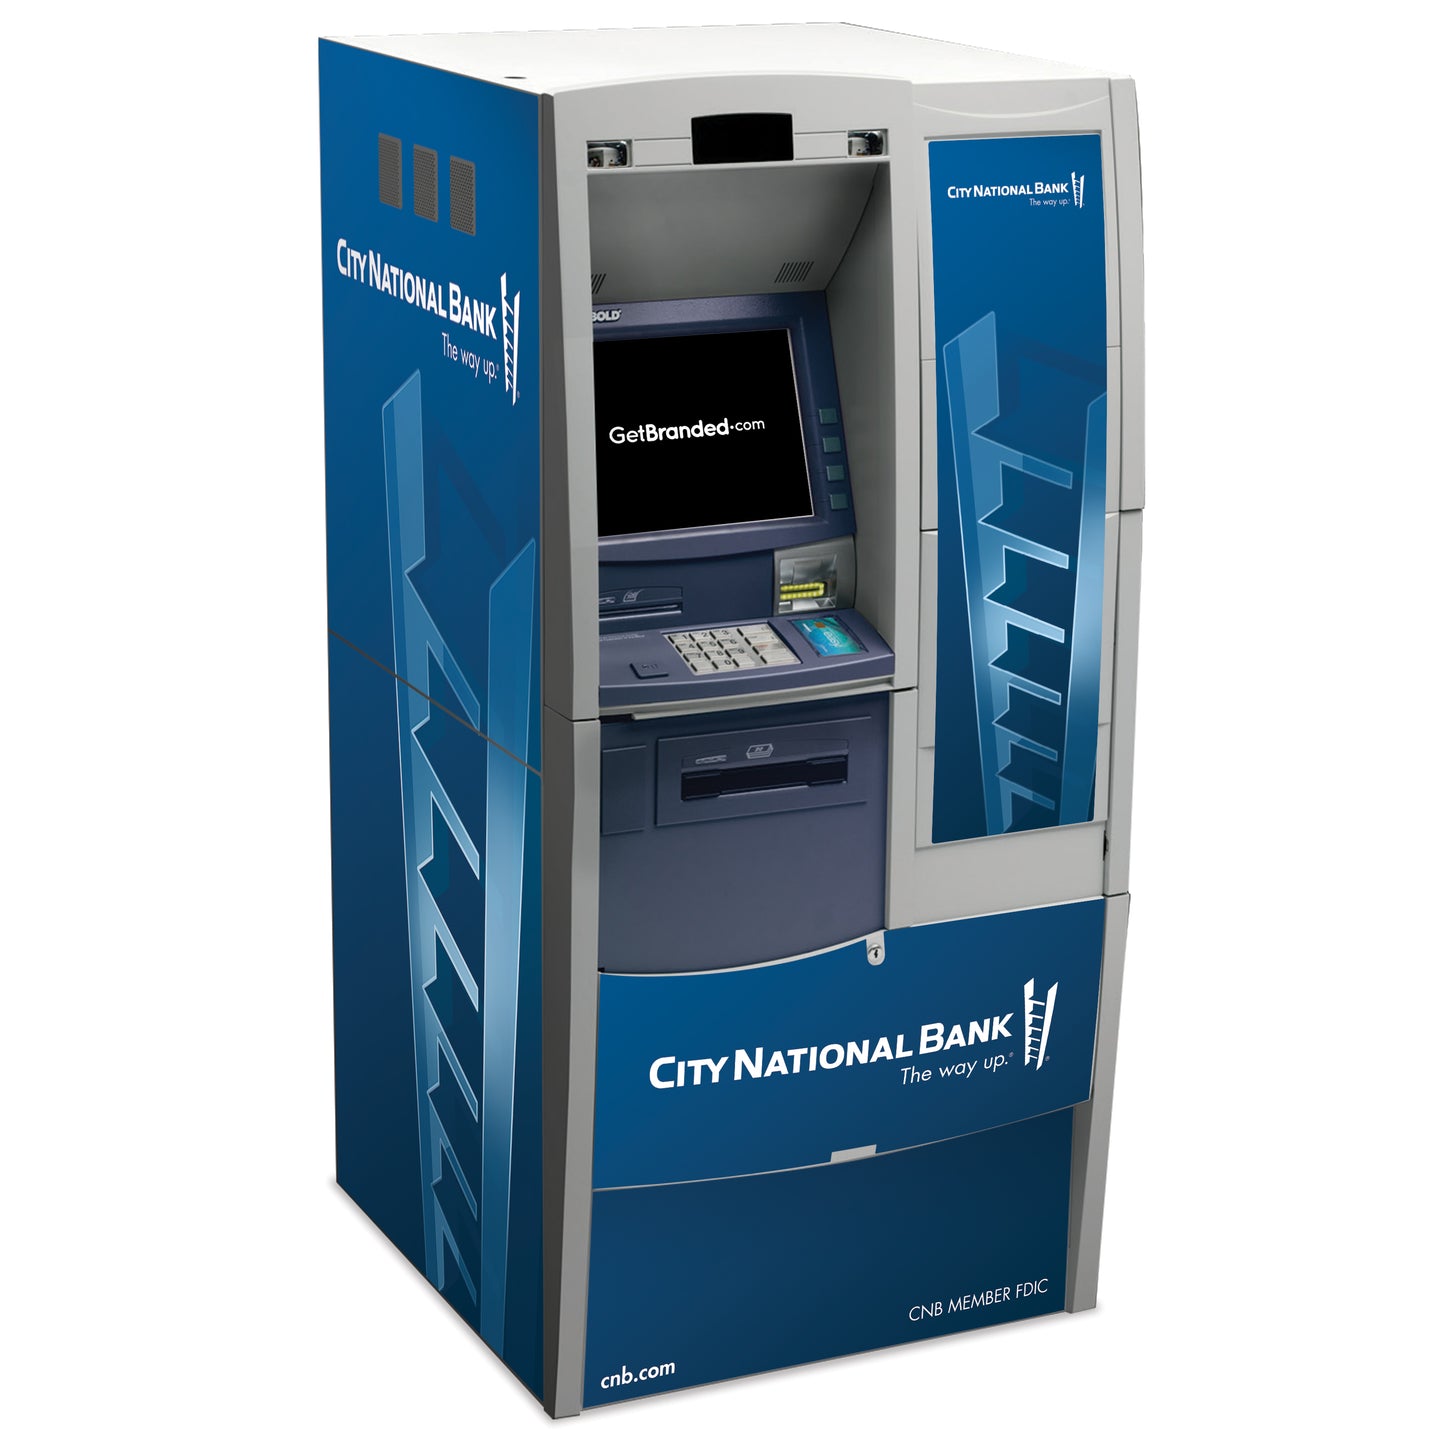 Diebold 720 ATM With Sidecar Wrap Rendering.